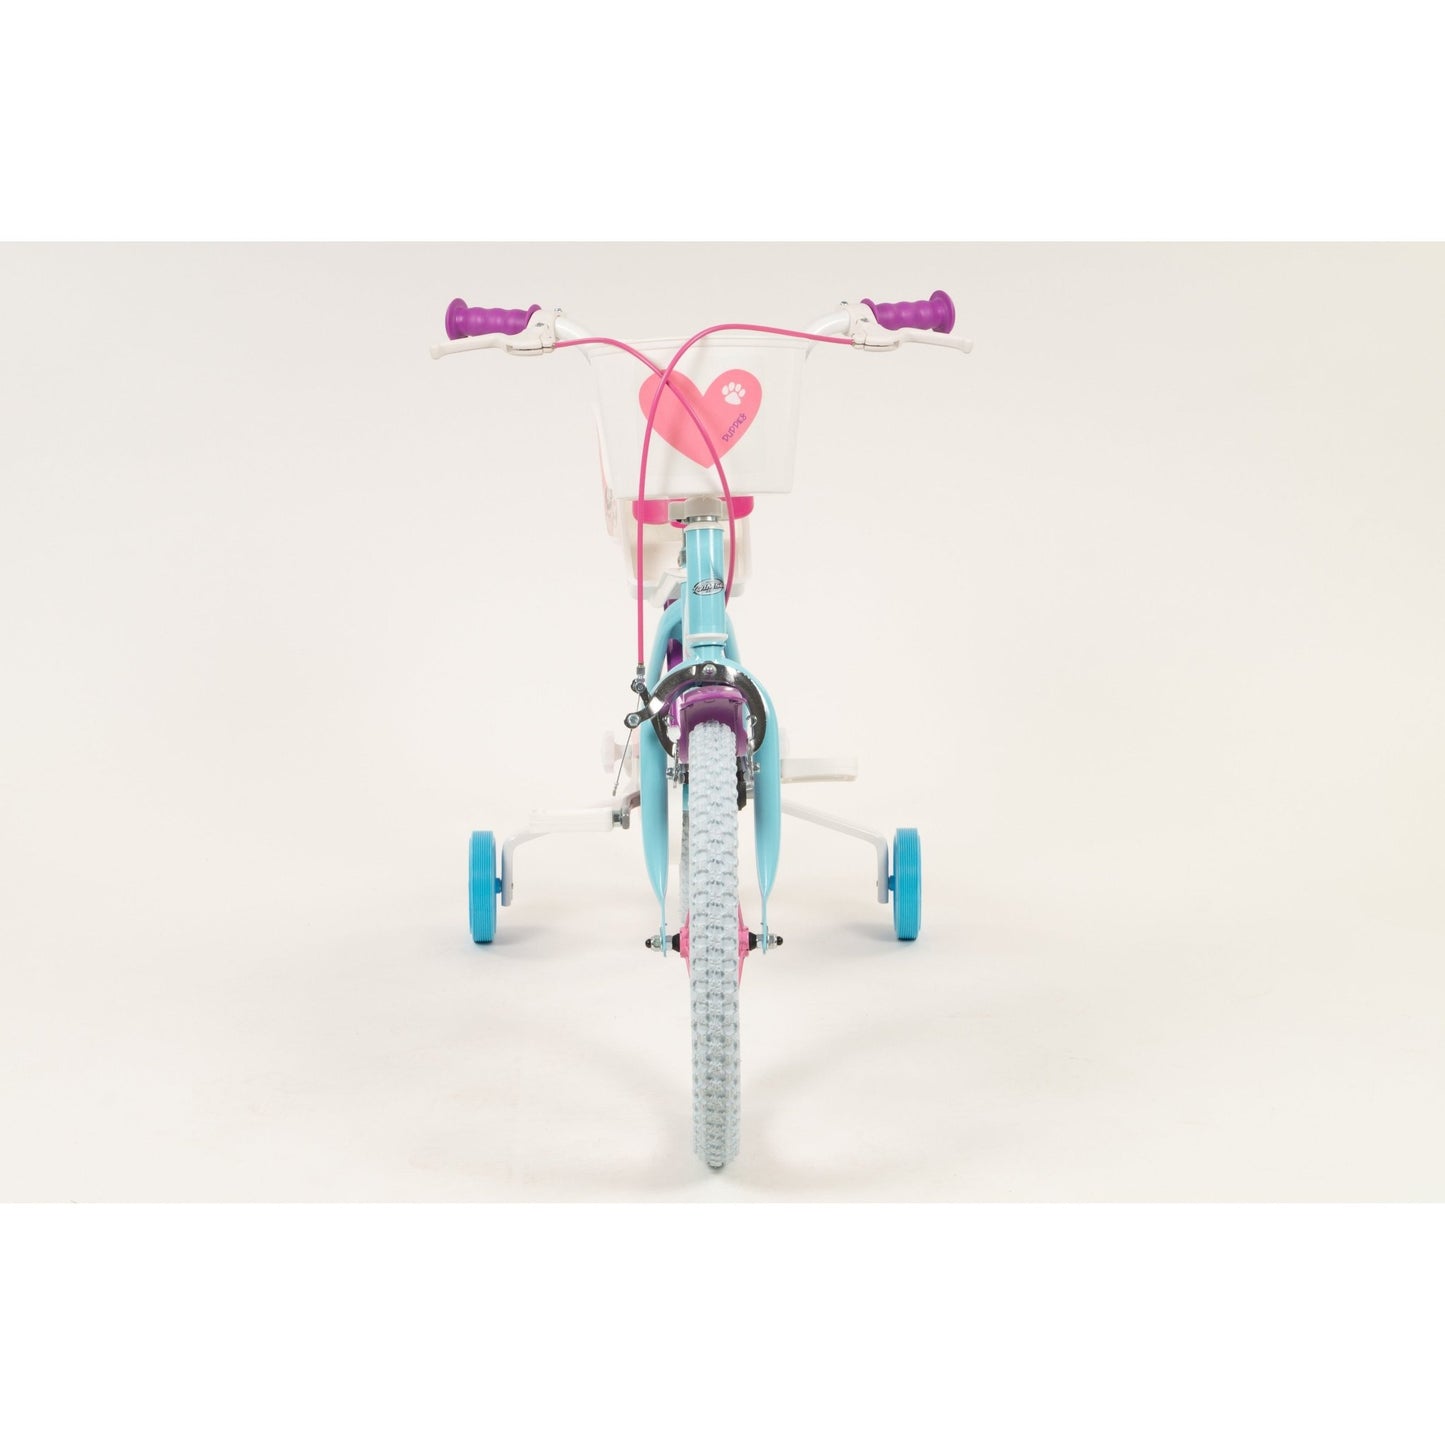 Pets Childrens Bicycle - Available in 3 Sizes - The Online Toy Shop - Bicycle - 12